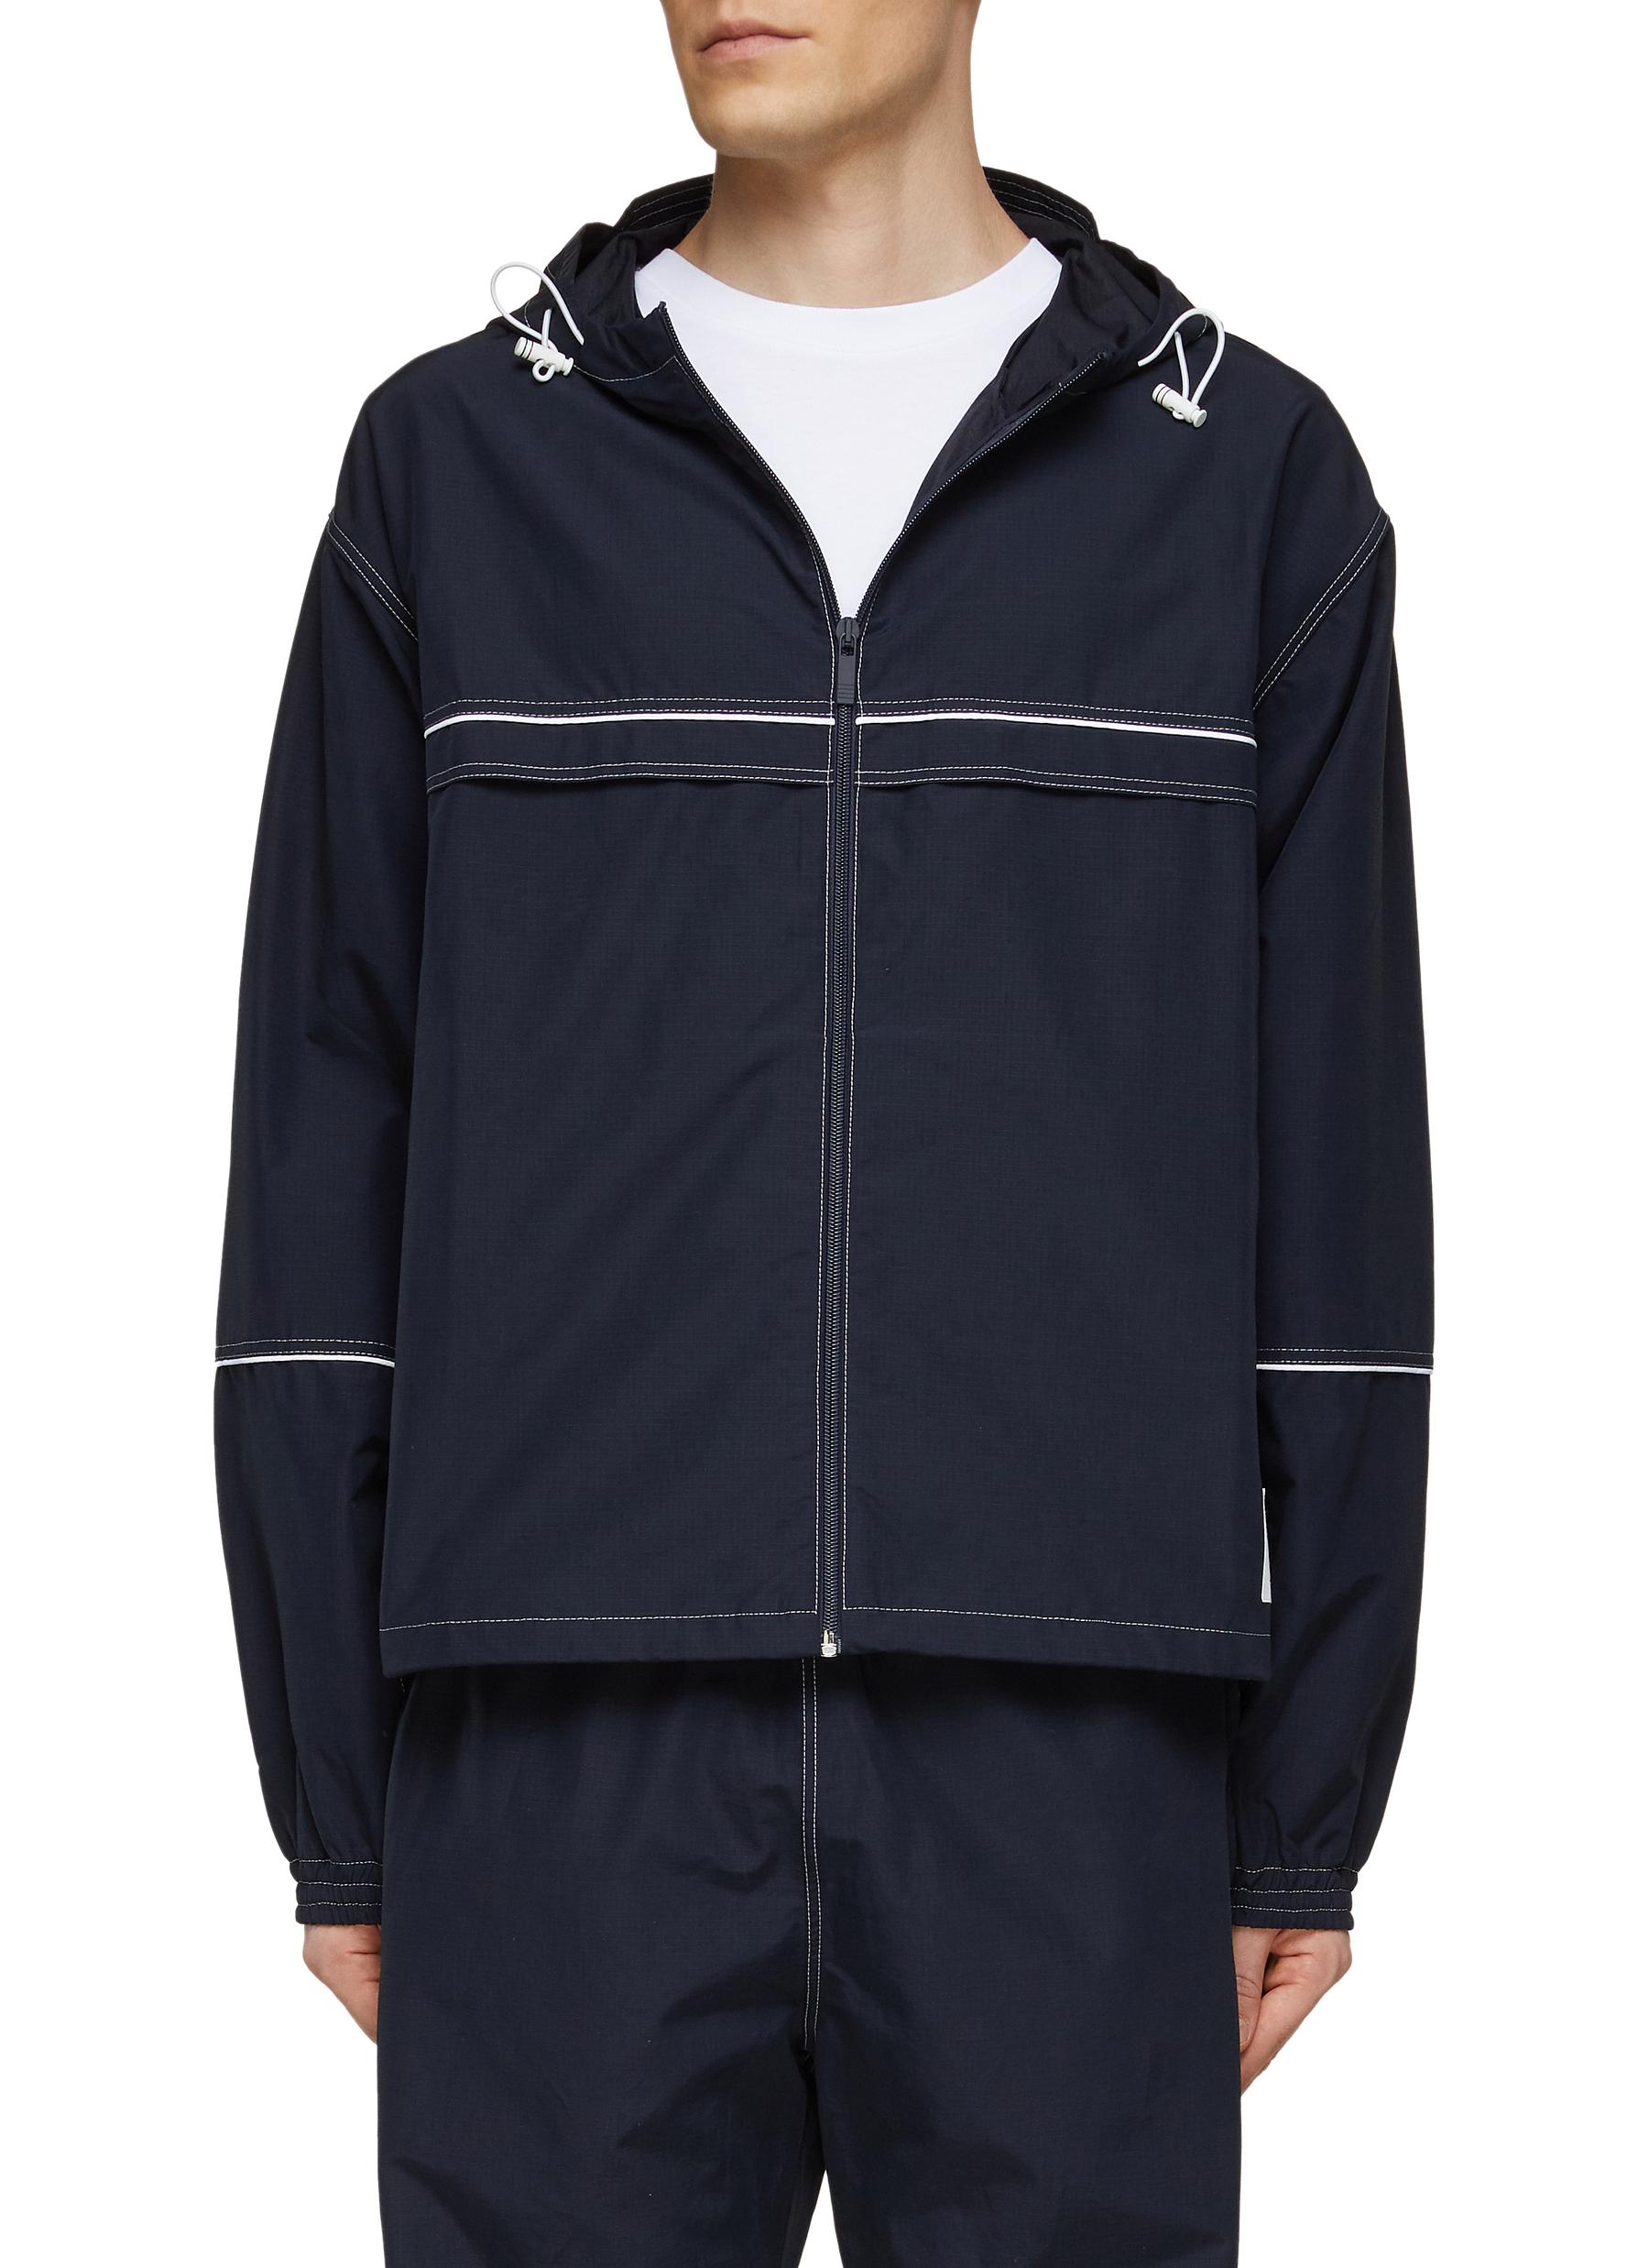 THOM BROWNE Contrasting Piping Oversized Hooded Track Jacket